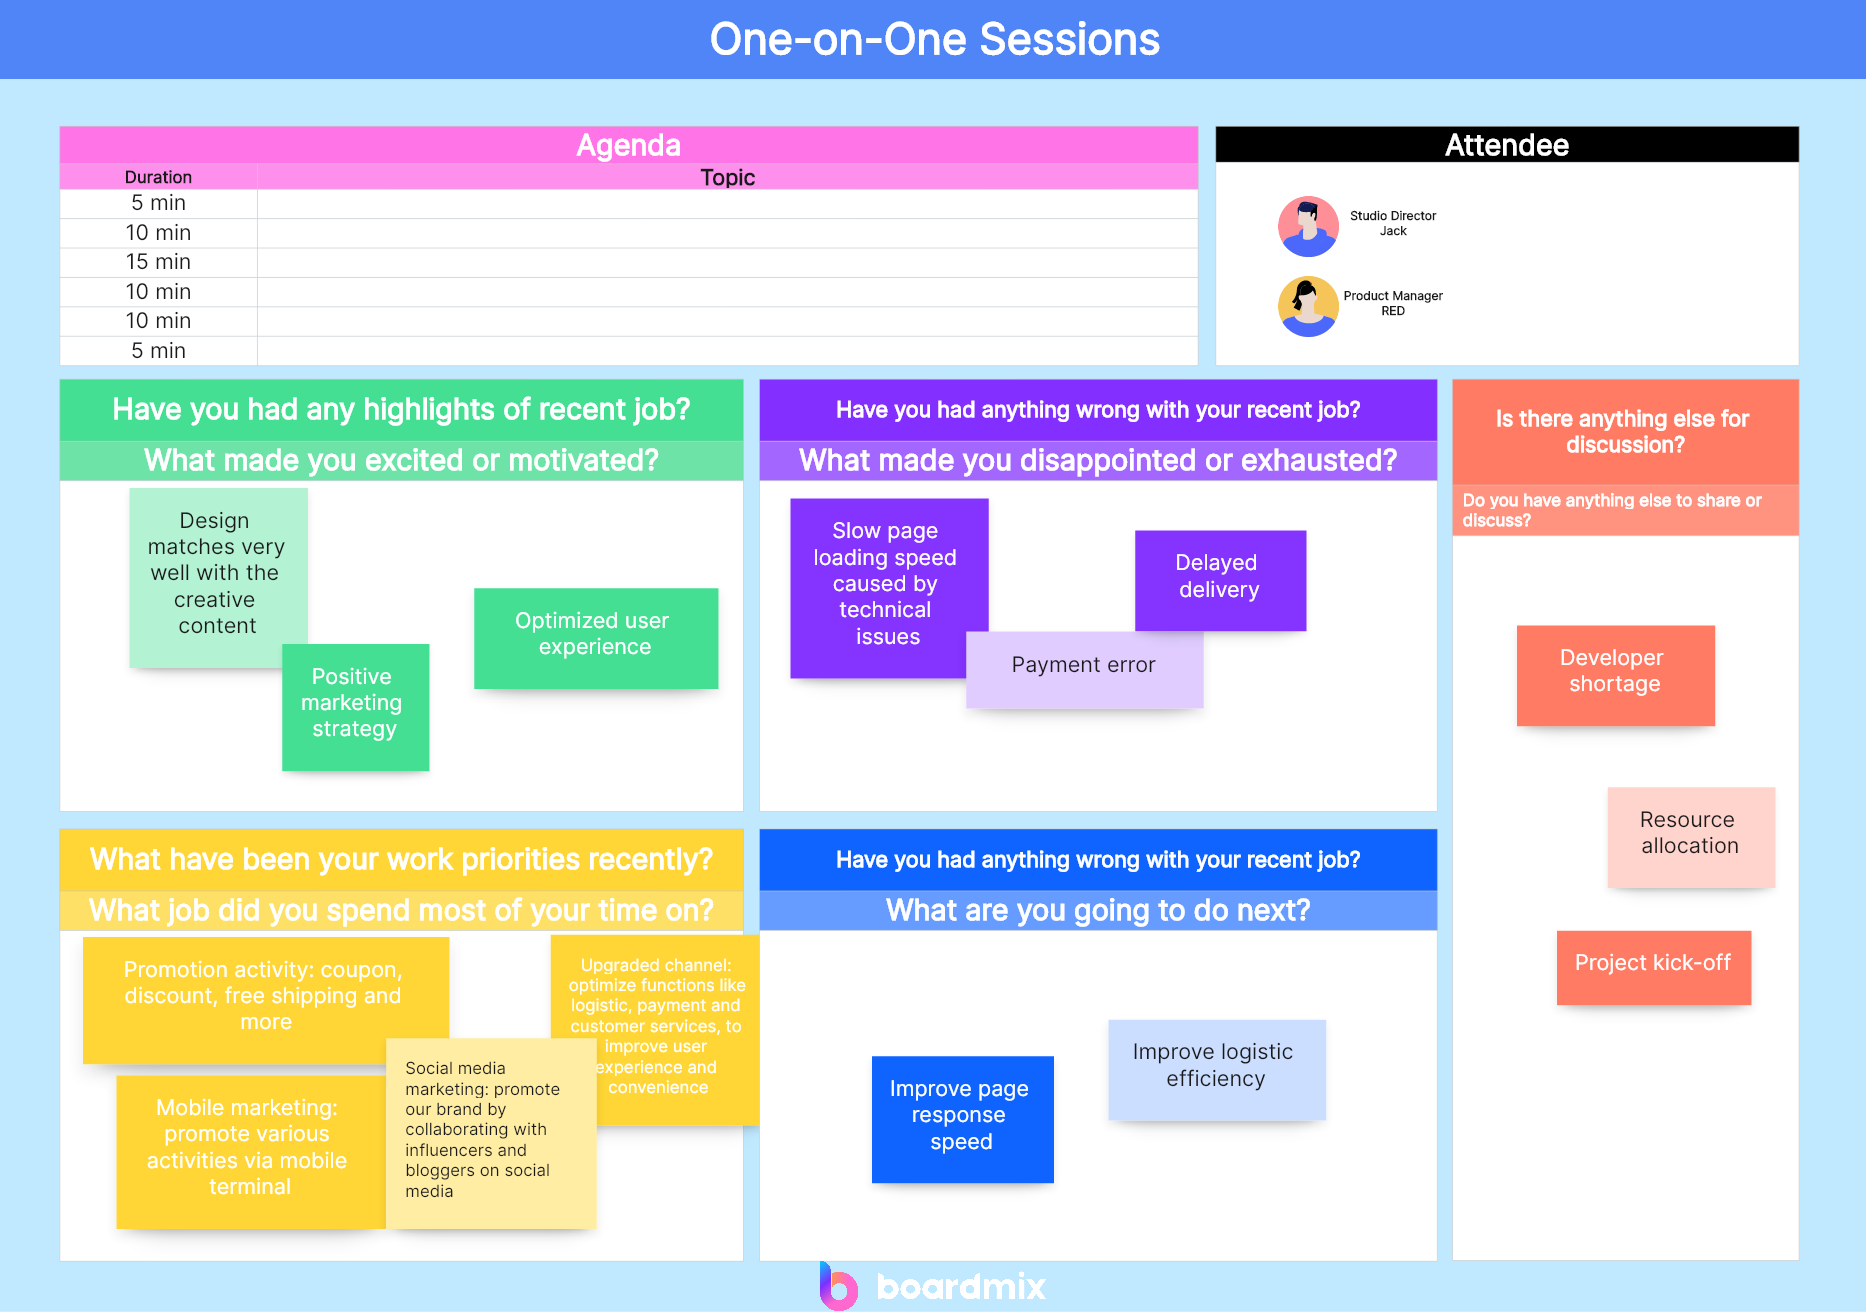 [Full Guide] One-on-One Sessions: with Employee, Manager, CEO